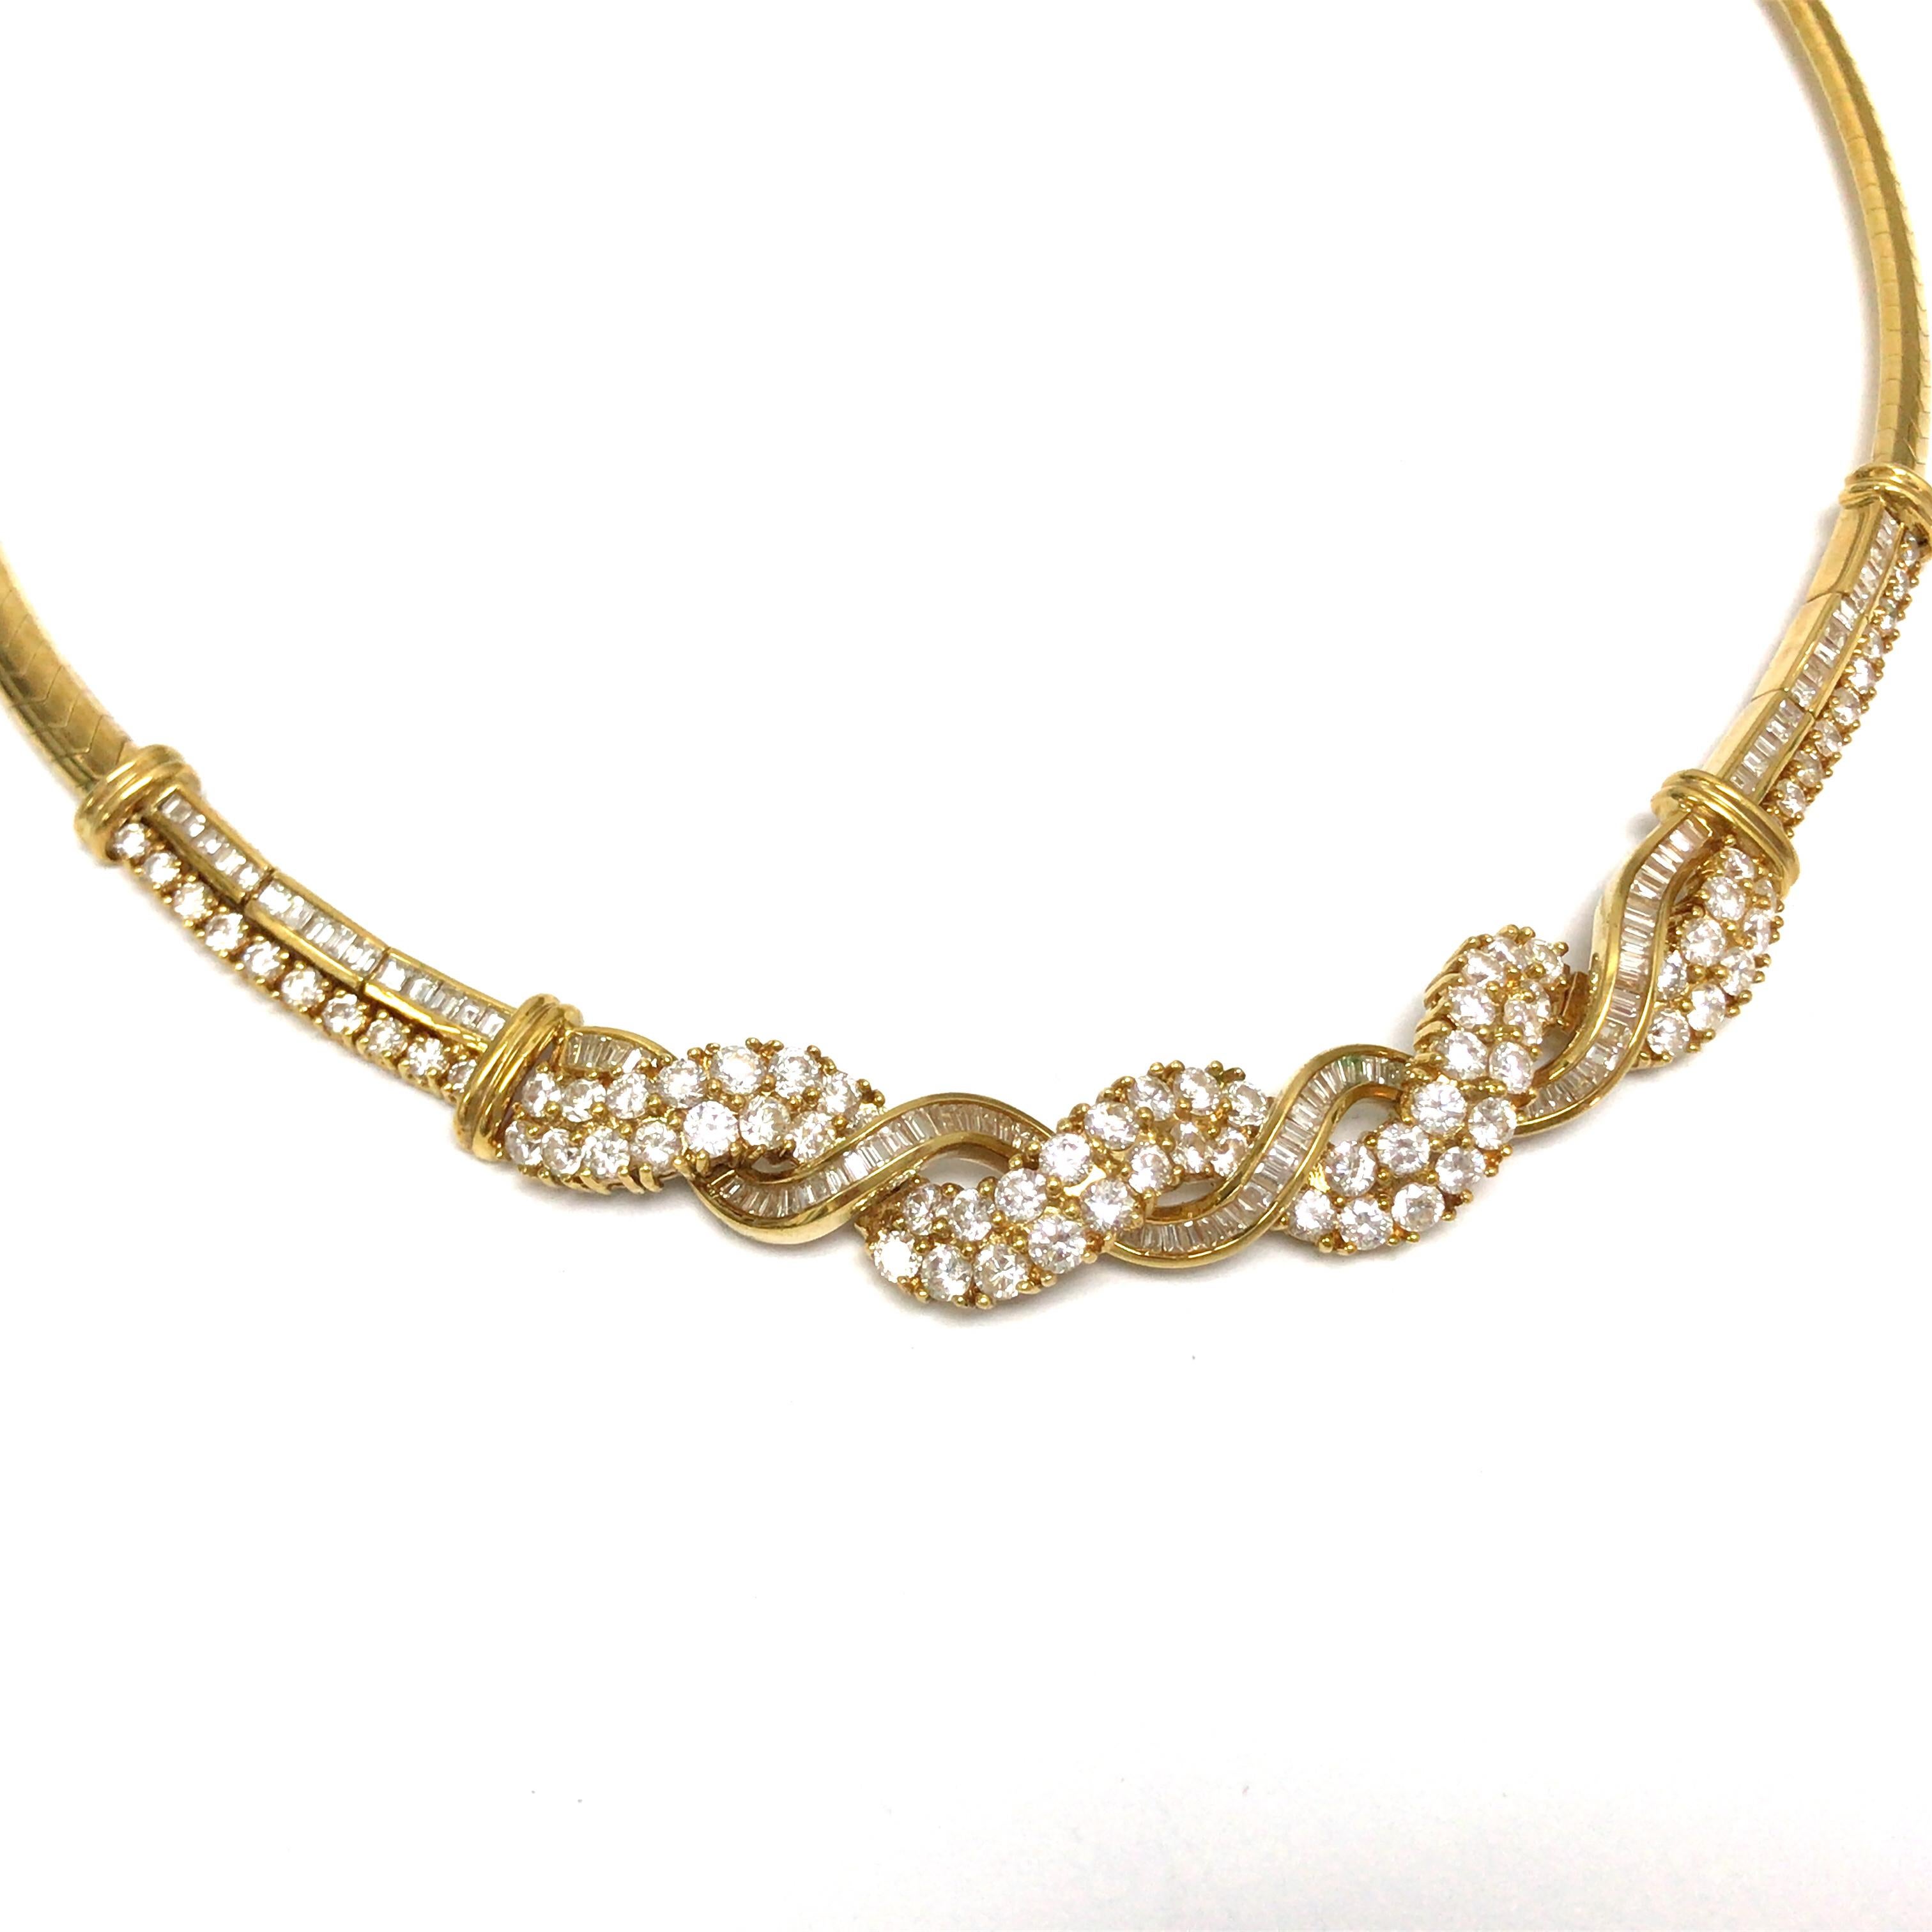 Round and Baguette Diamond Twist Necklace in 18K Yellow Gold.  Round Brilliant Cut and Baguette Diamonds weighing 8.50 carat total weight, G-H in color and VS-SI in clarity.  The Necklace measures 16 inch in length and 1/2 inch in width.   42.76